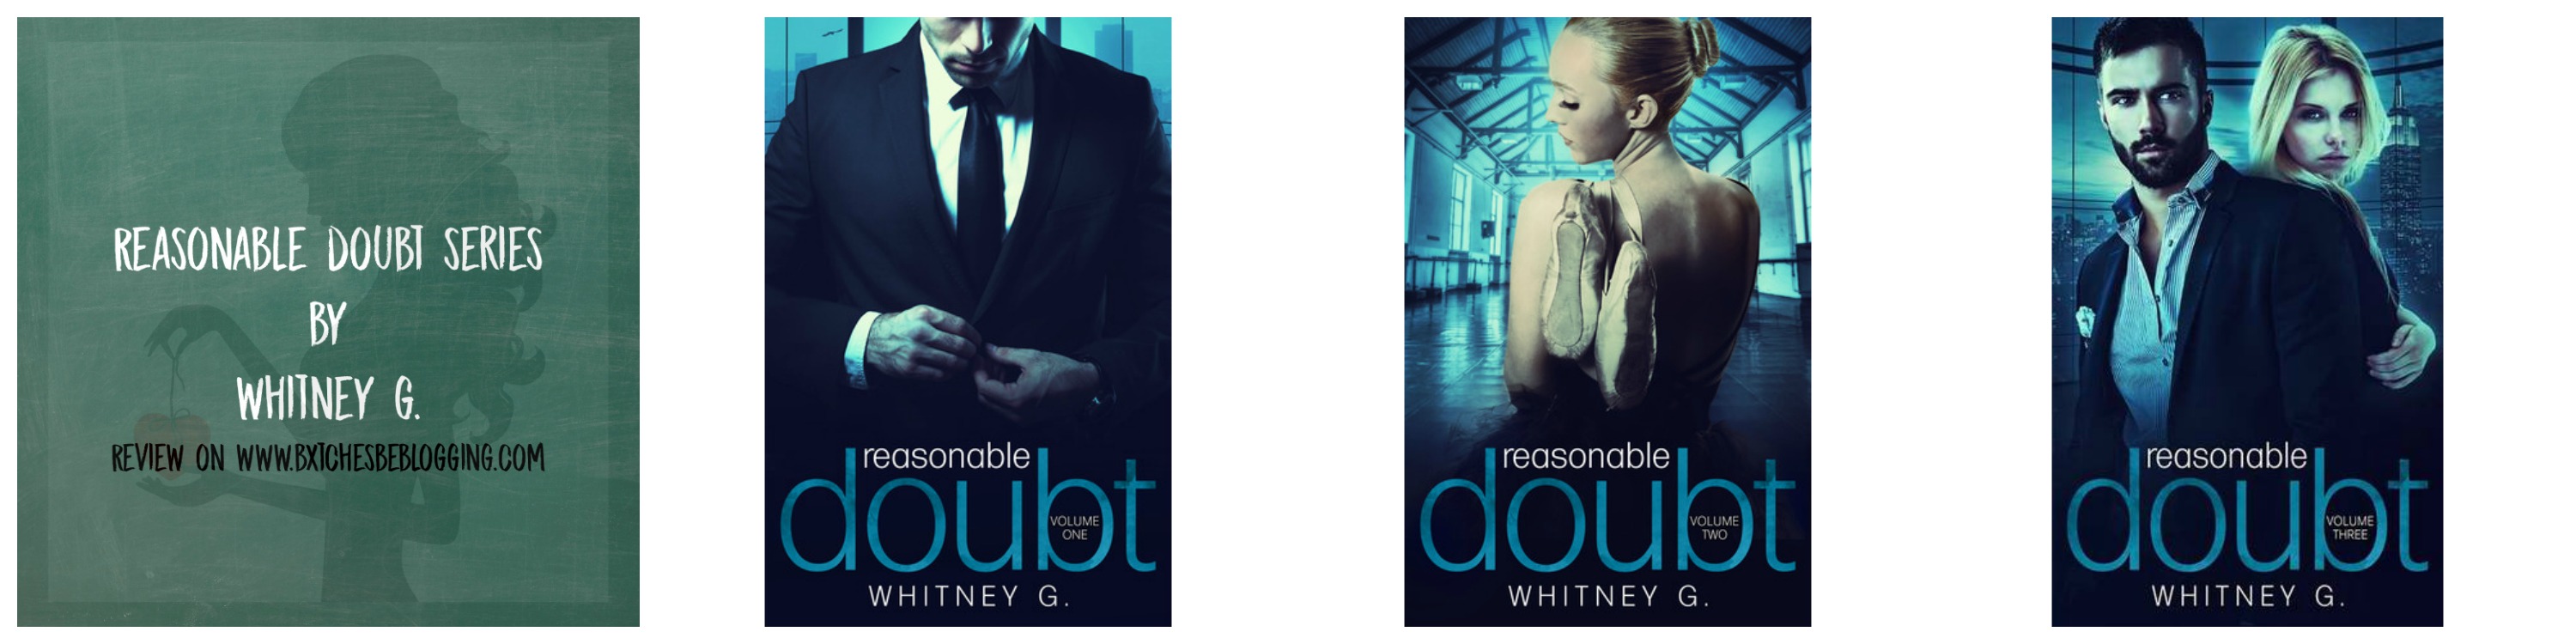 Reasonable Doubt Series by Whitney G. | Review on www.bxtchesbeblogging.com